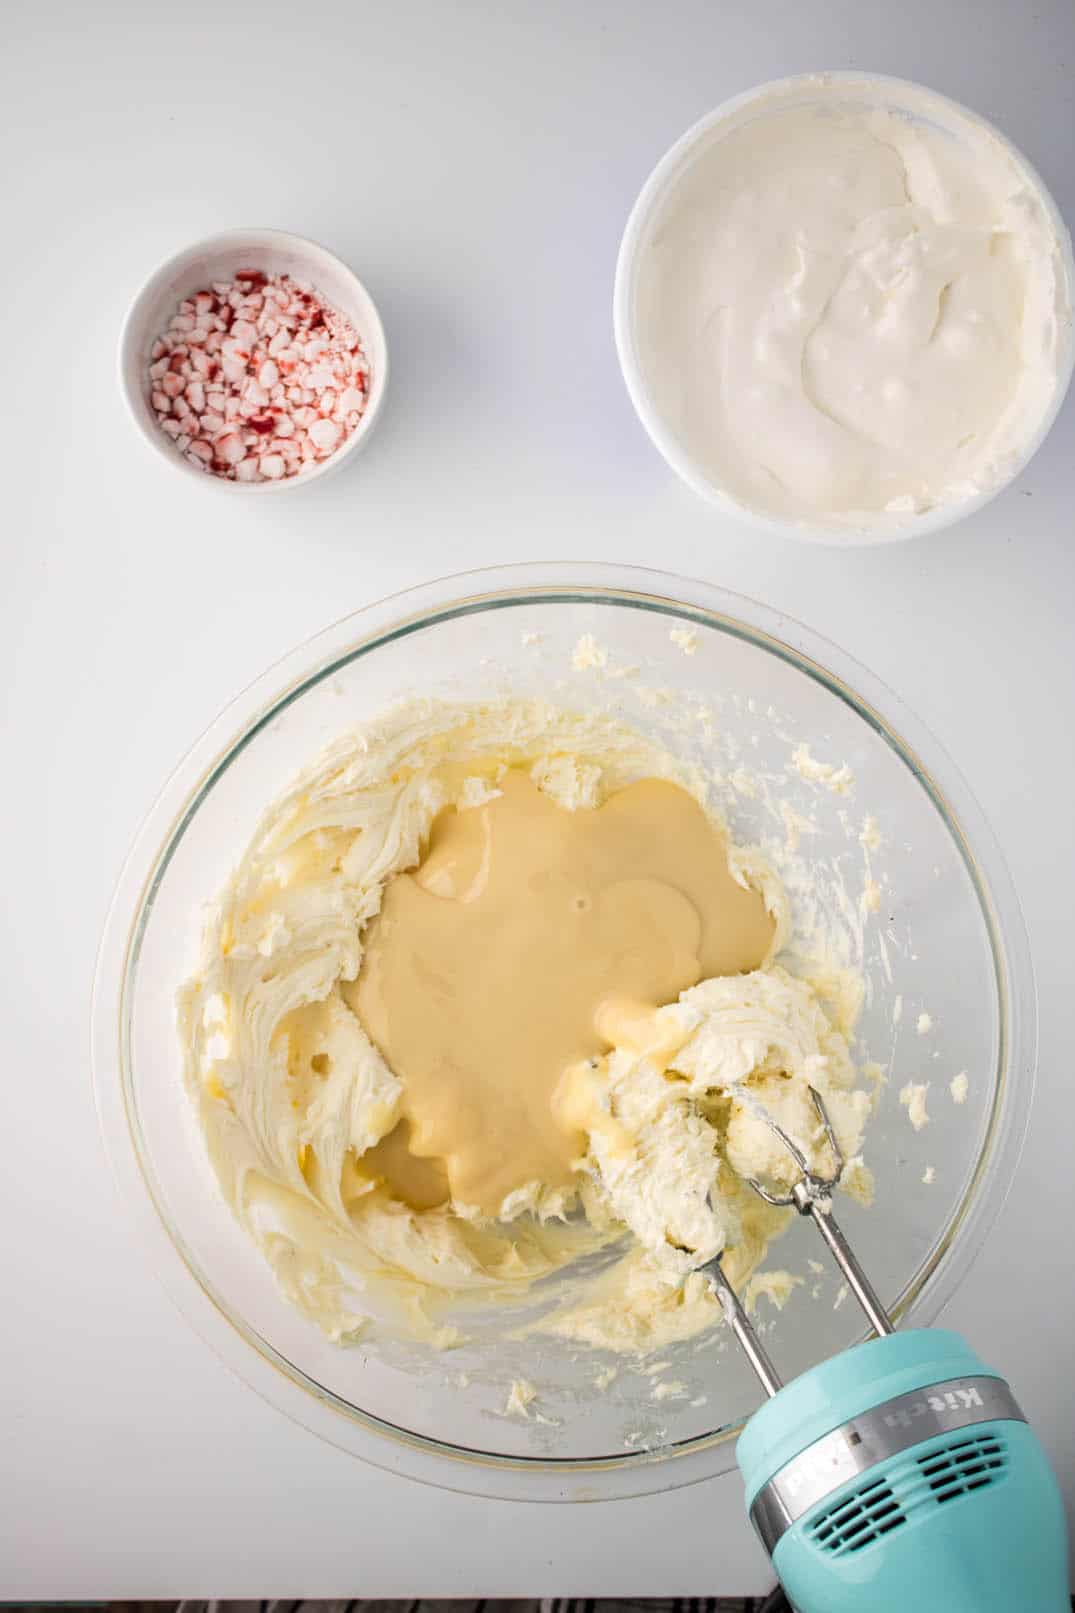 Adding condensed milk to a mix of soft cream and cookie sandwich fillings, mixed in a glass bowl.